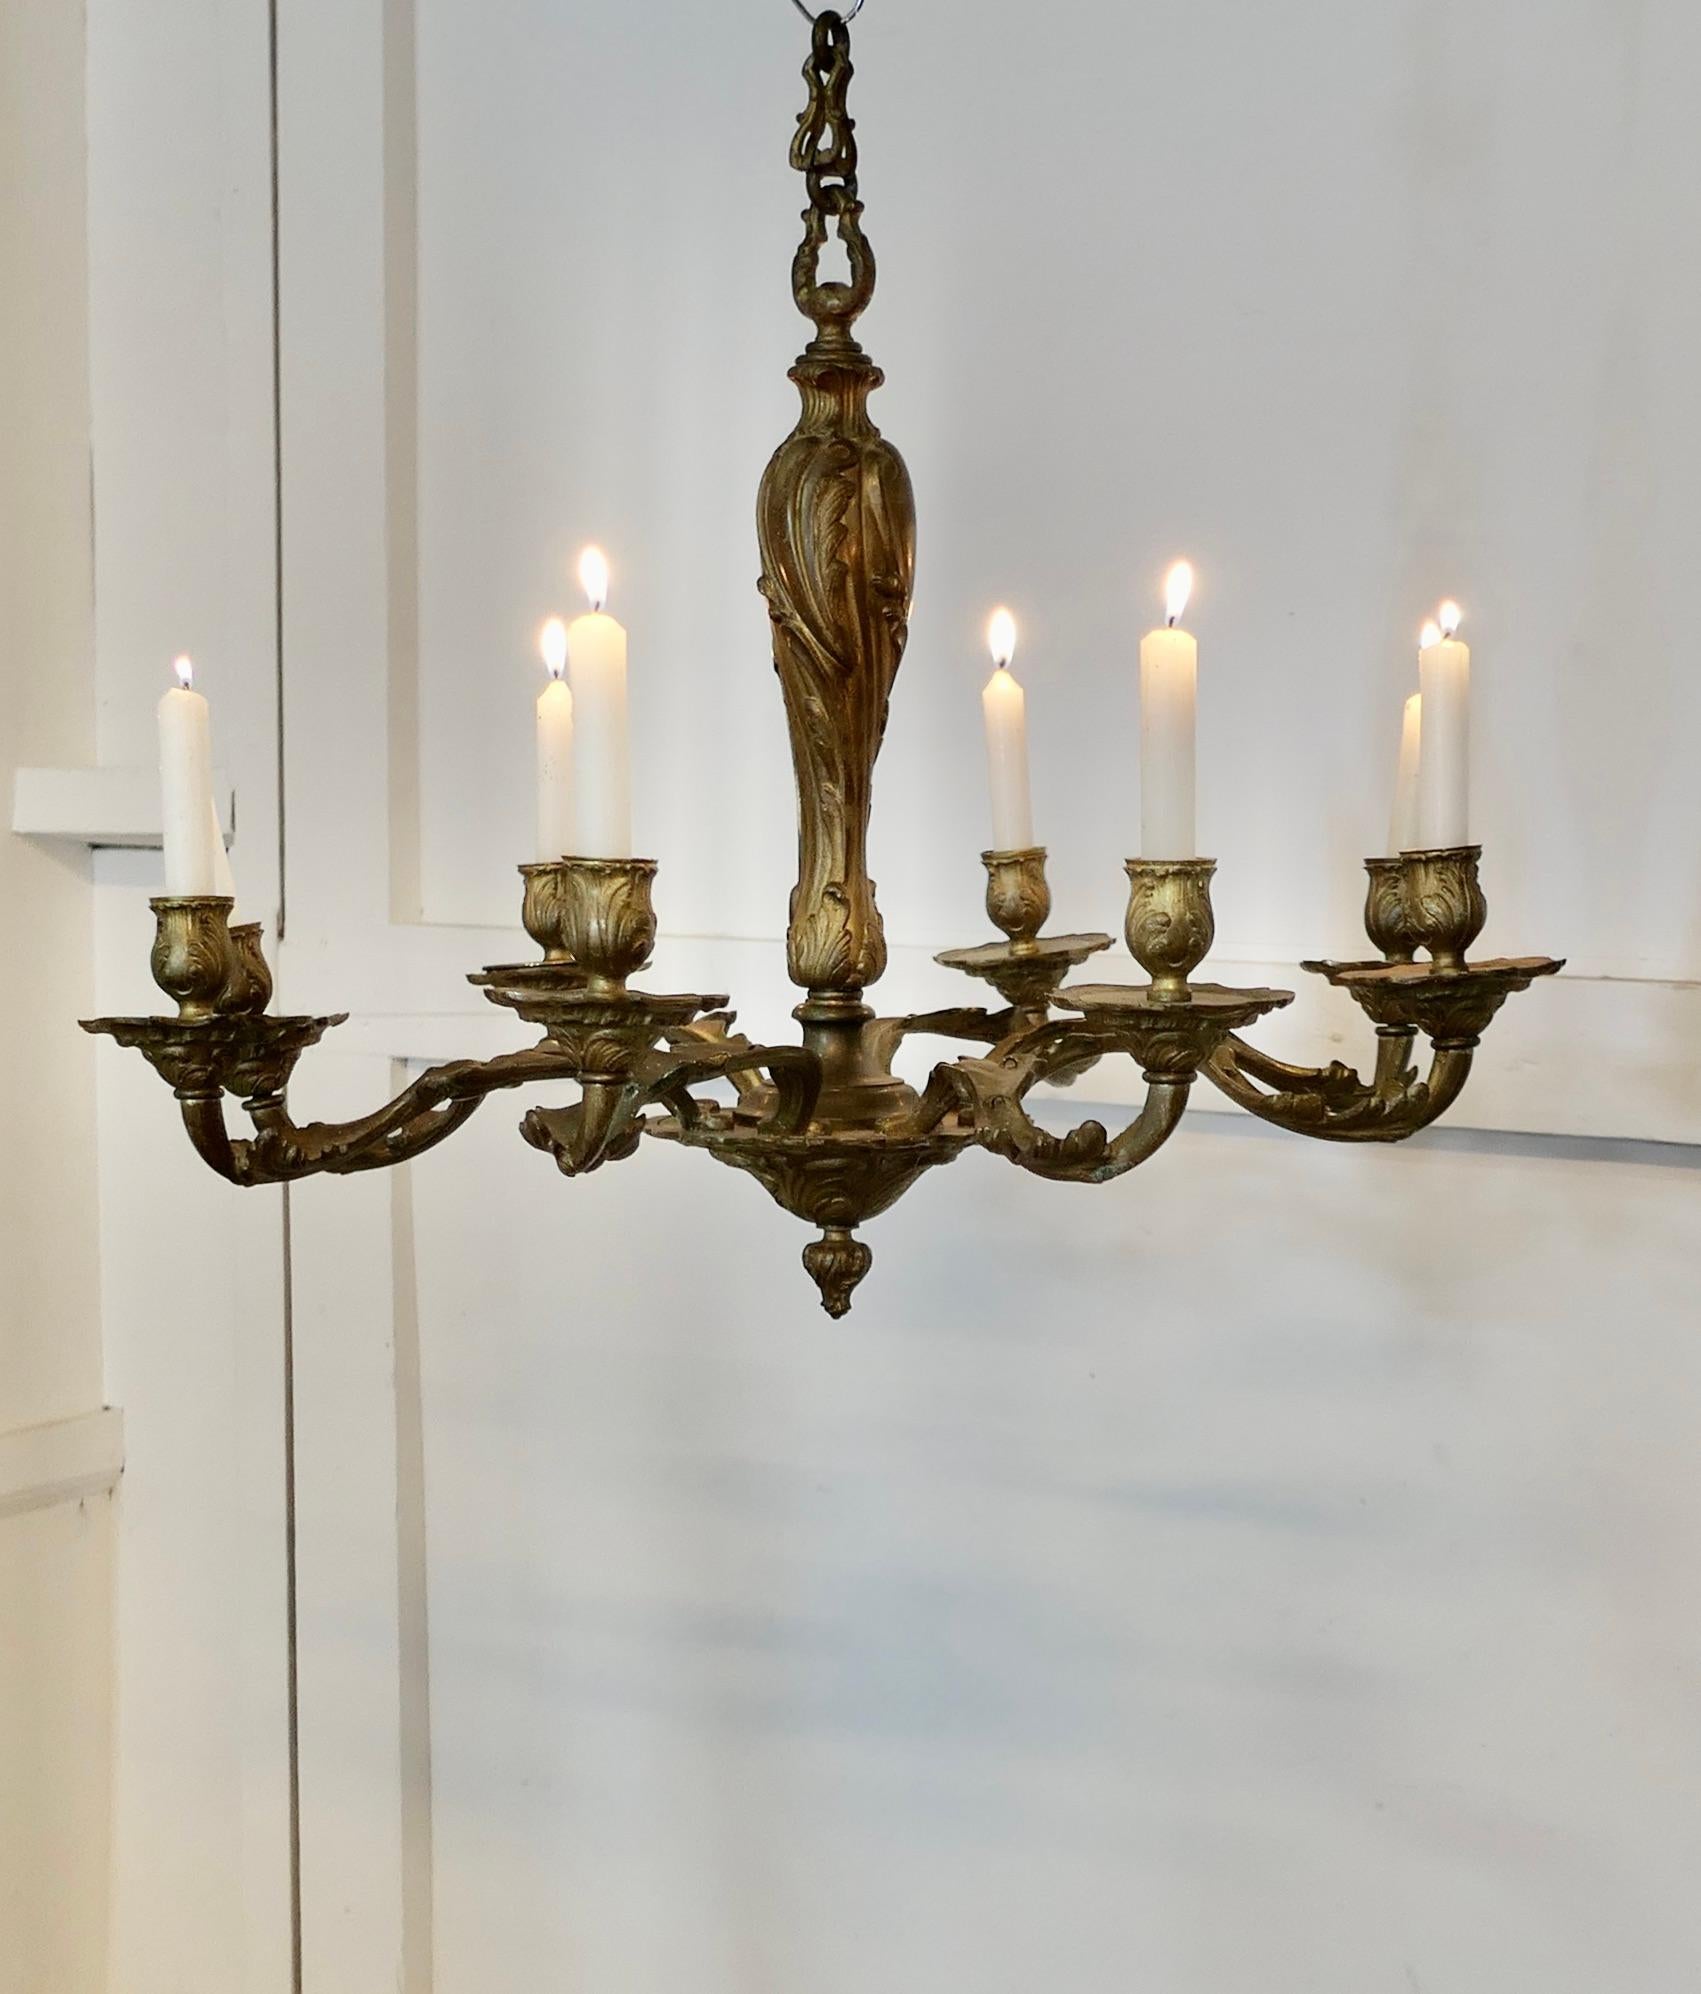 A French Gilded Brass 8 Branch Rococo Chandelier (Candelier)   For Sale 2